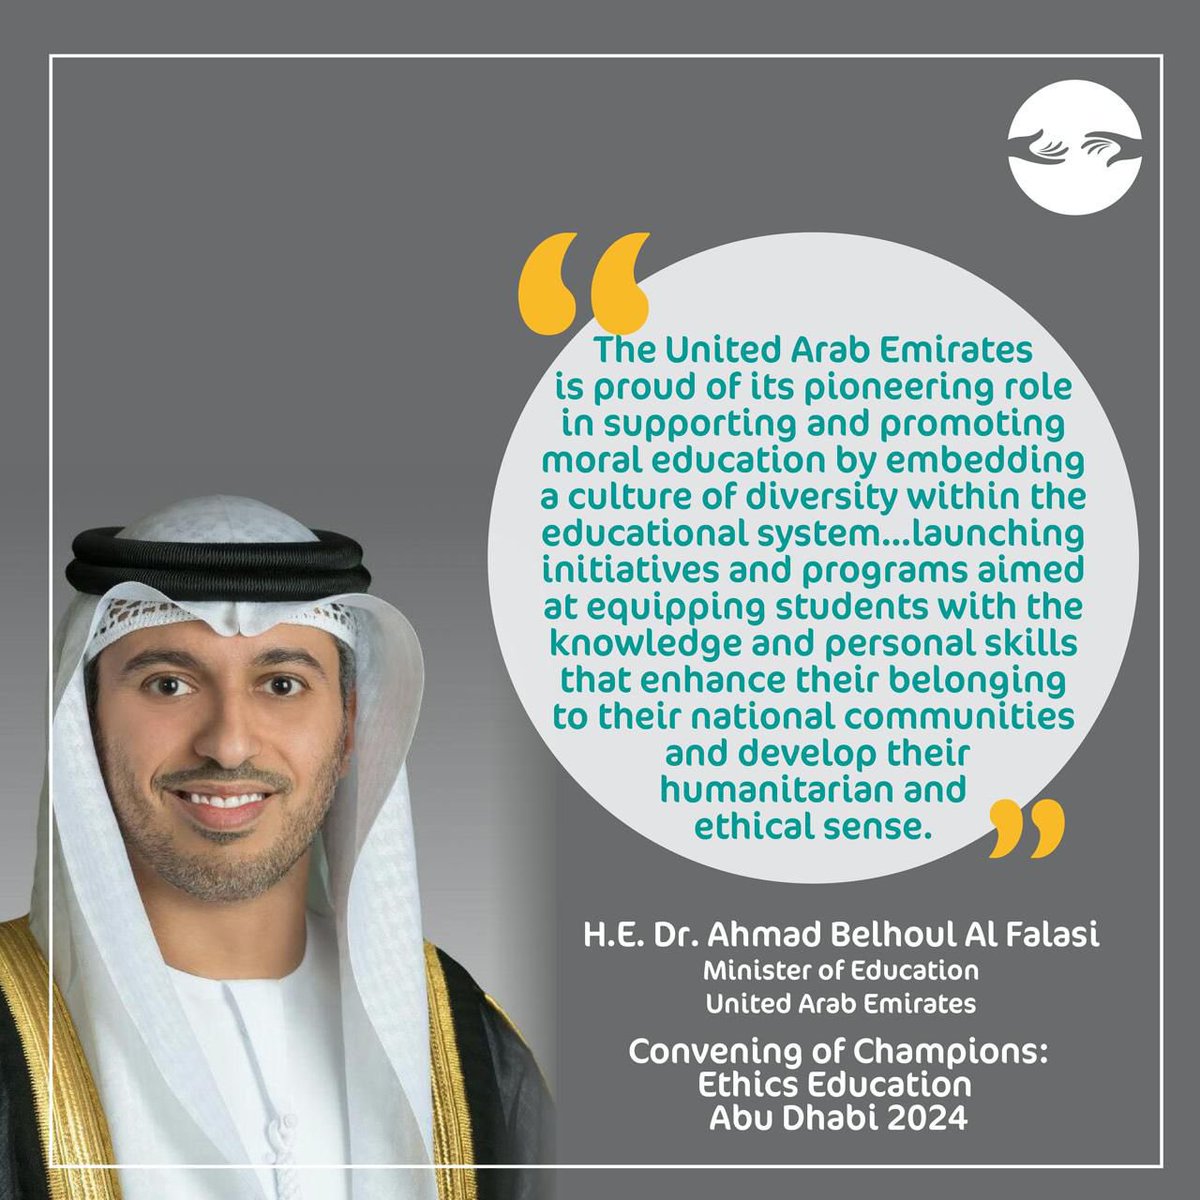 UAE Minister of Education H.E. Dr. Ahmad Belhoul Al Falasi shared insights and experiences of ethics education in his country, during the ‘Convening of Champions: Ethics Education’ conference in Abu Dhabi.